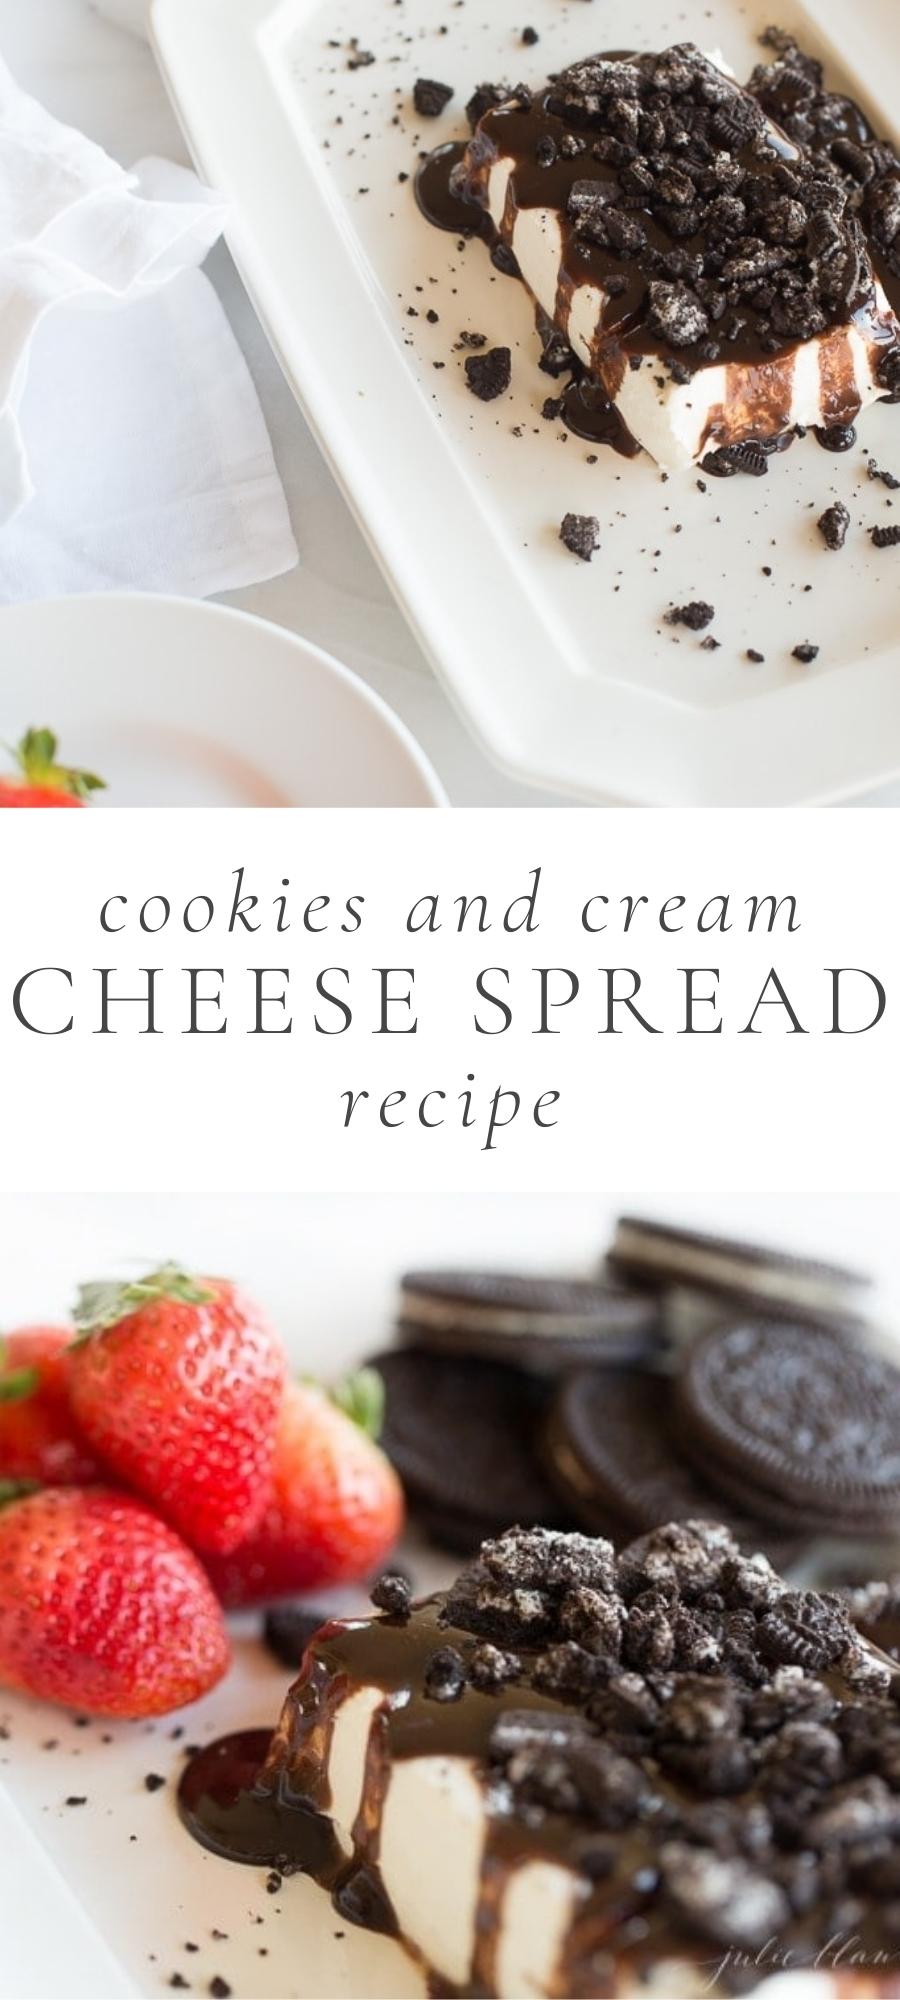 cookies and cream cheese spread on plate next to white napkin with strawberries and cookies